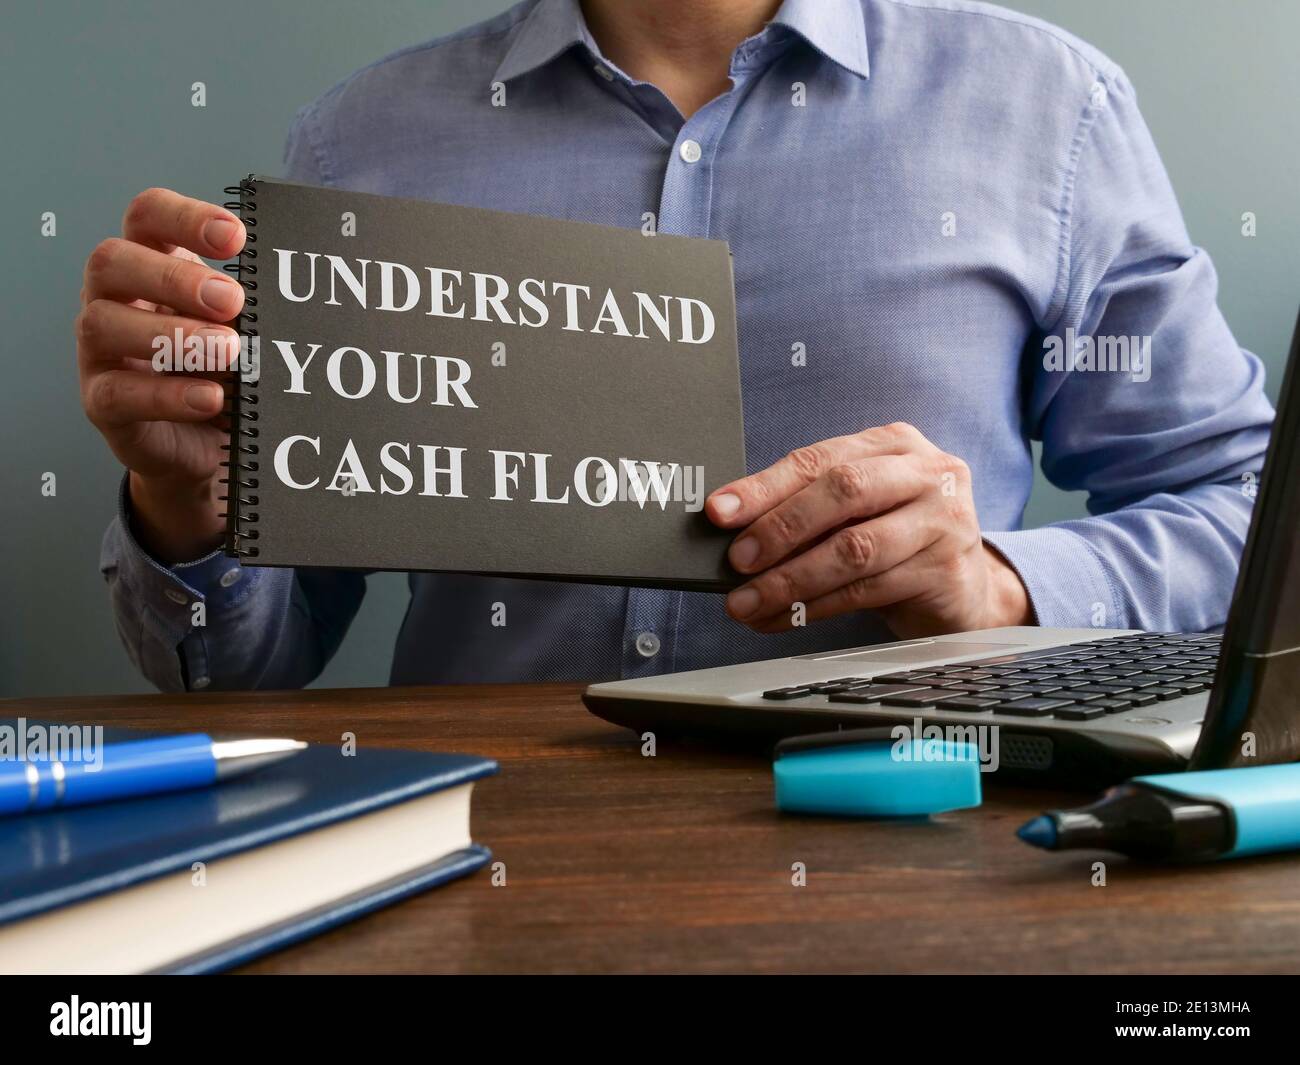 Man shows Understand your cash flow sign on the page. Stock Photo